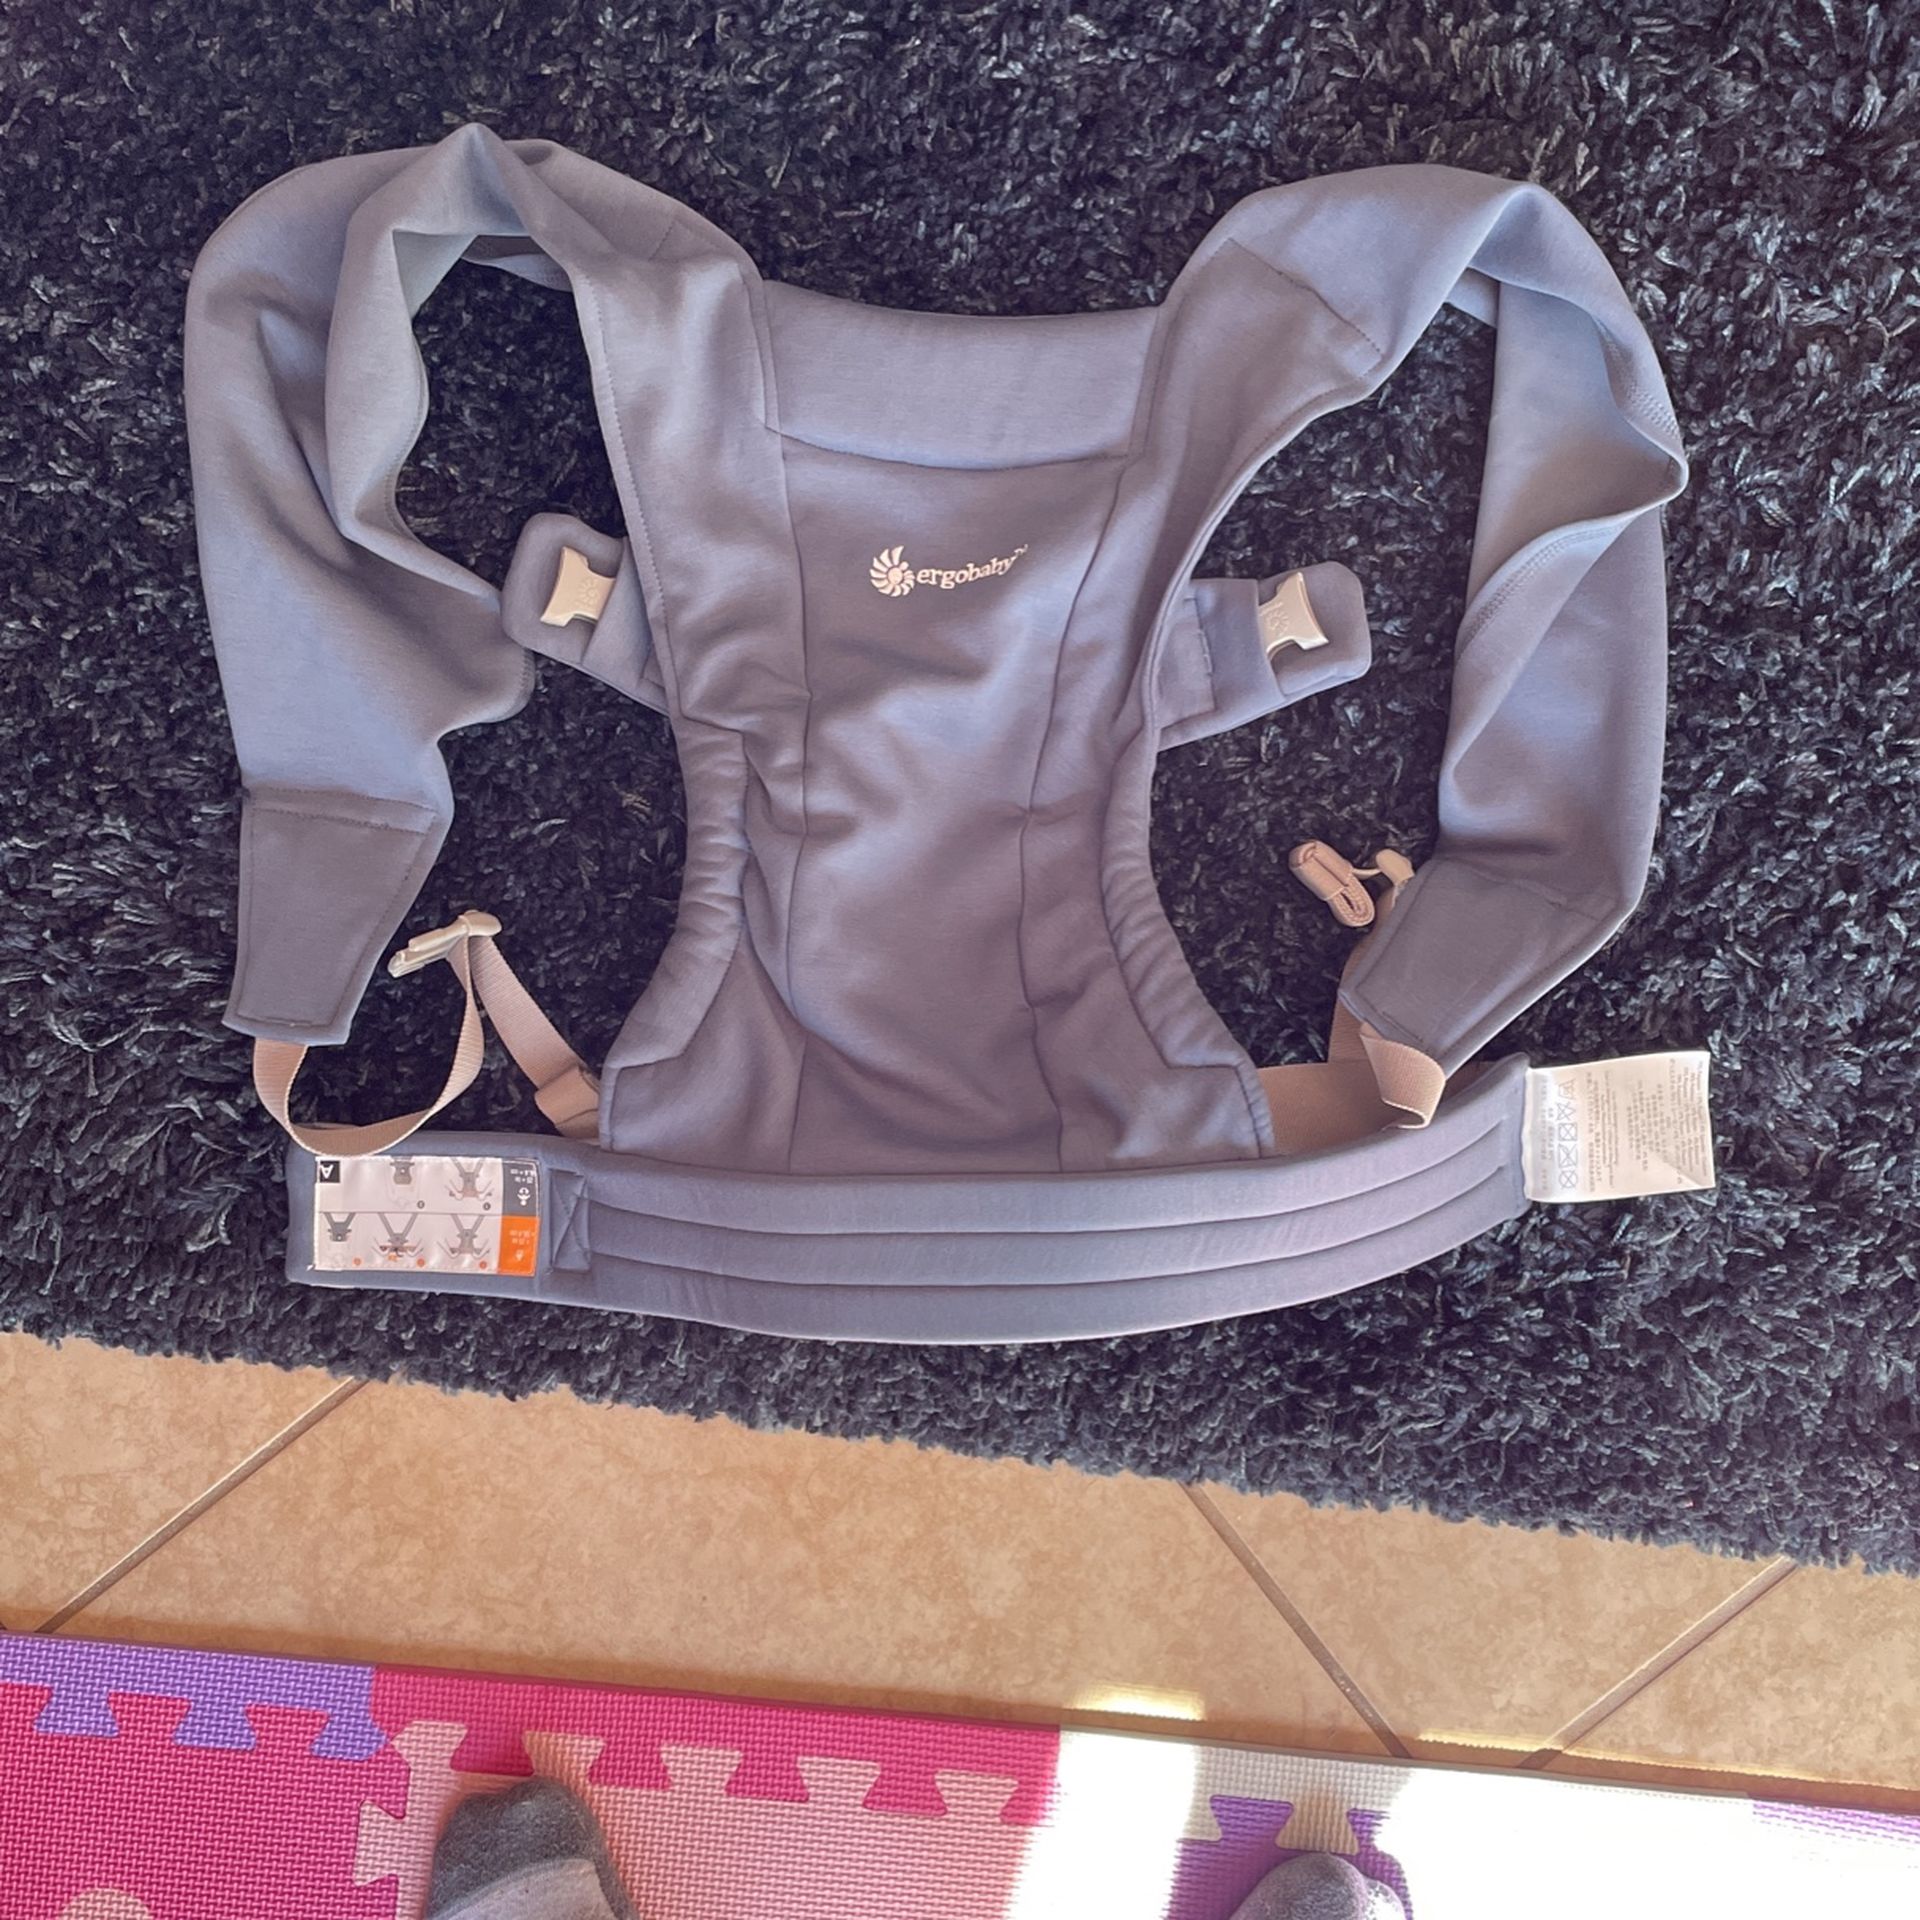 Ergobaby Baby Carrier Strap Pouch 